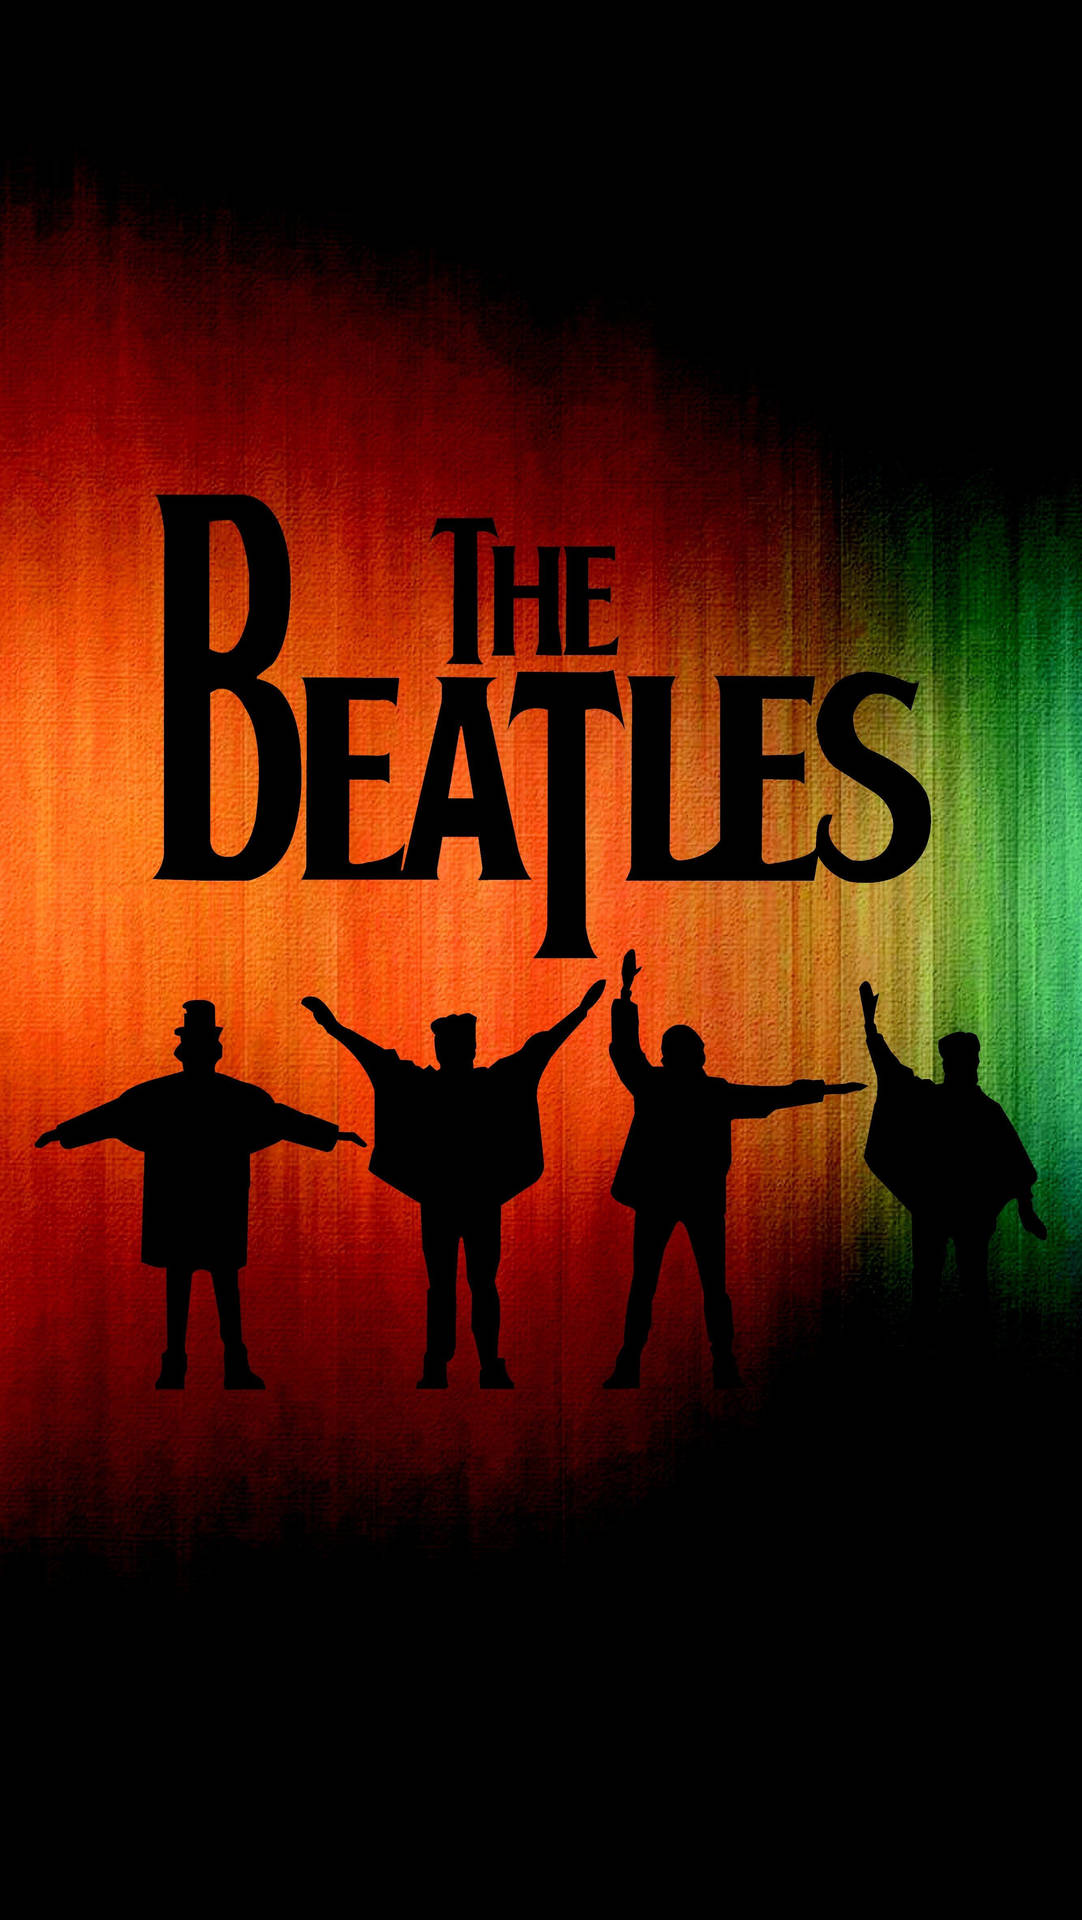 Iconic Beatles In Silhouette Wallpaper